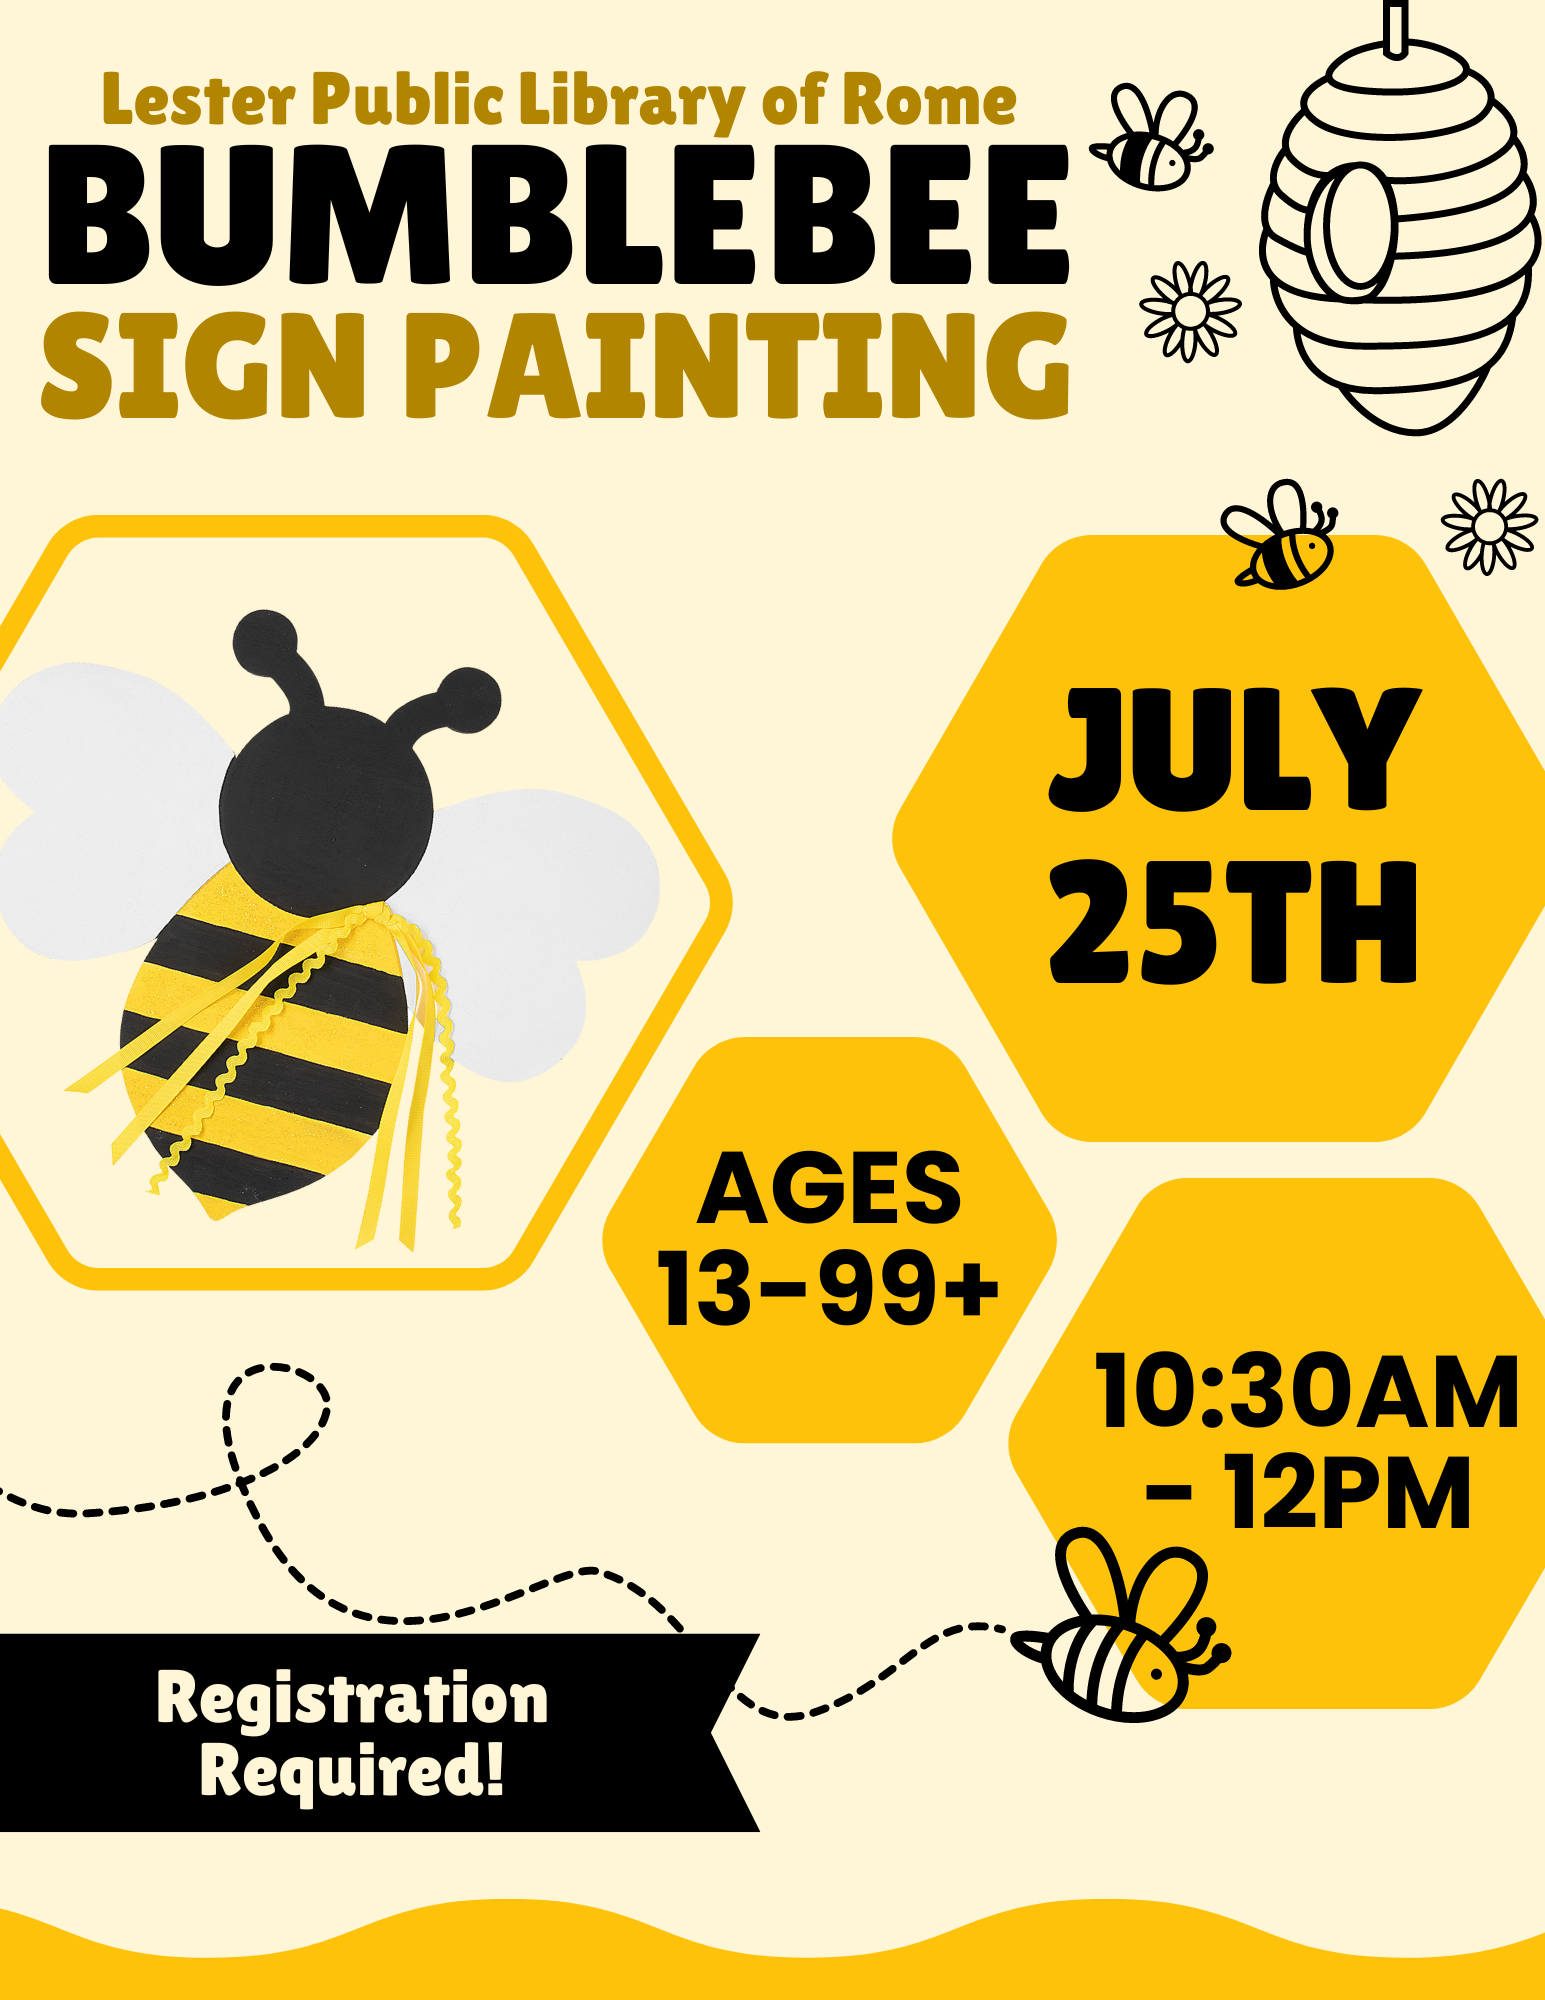 Image of bumblebee sign and honeycomb